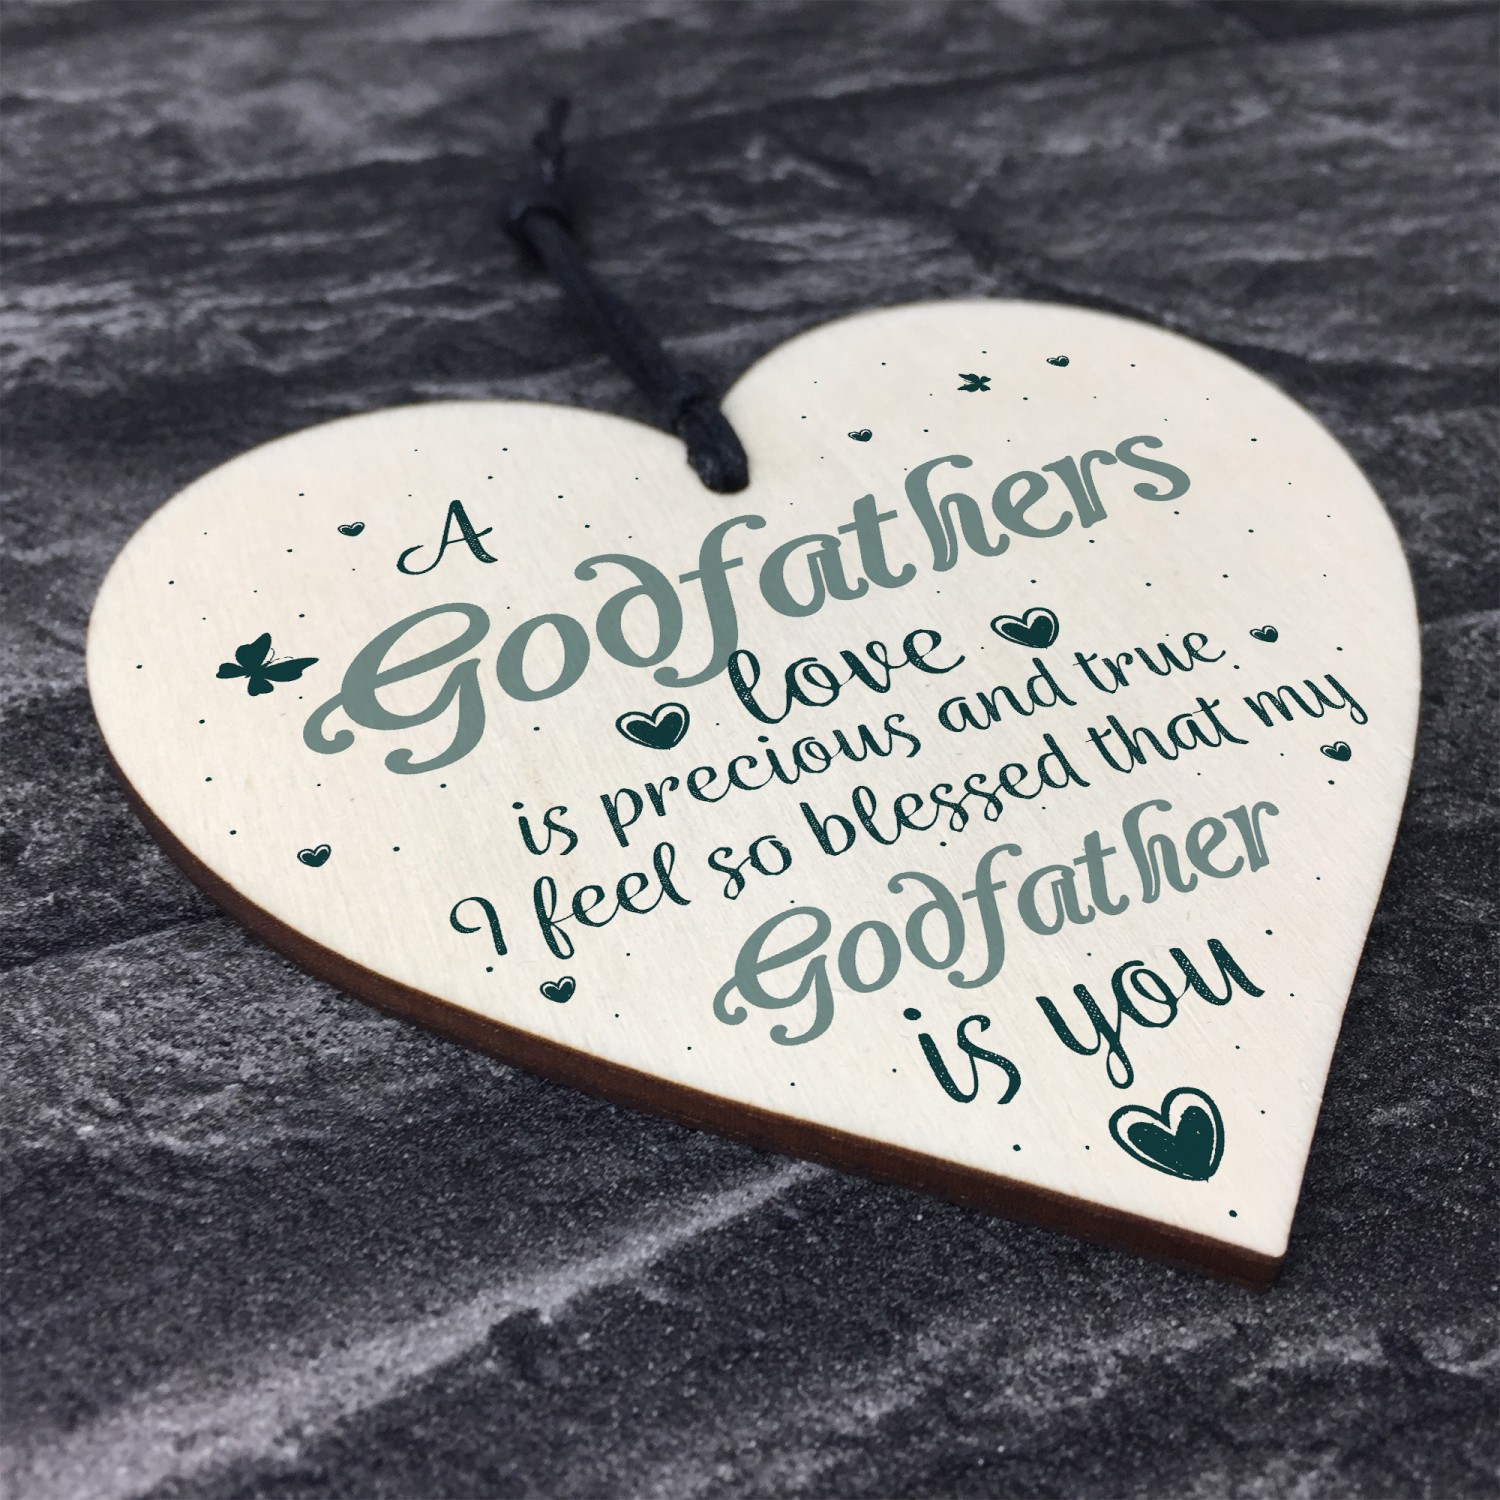 Godfathers Love Heart Plaque Sign Fathers Day Christening Birthday Asking Gifts